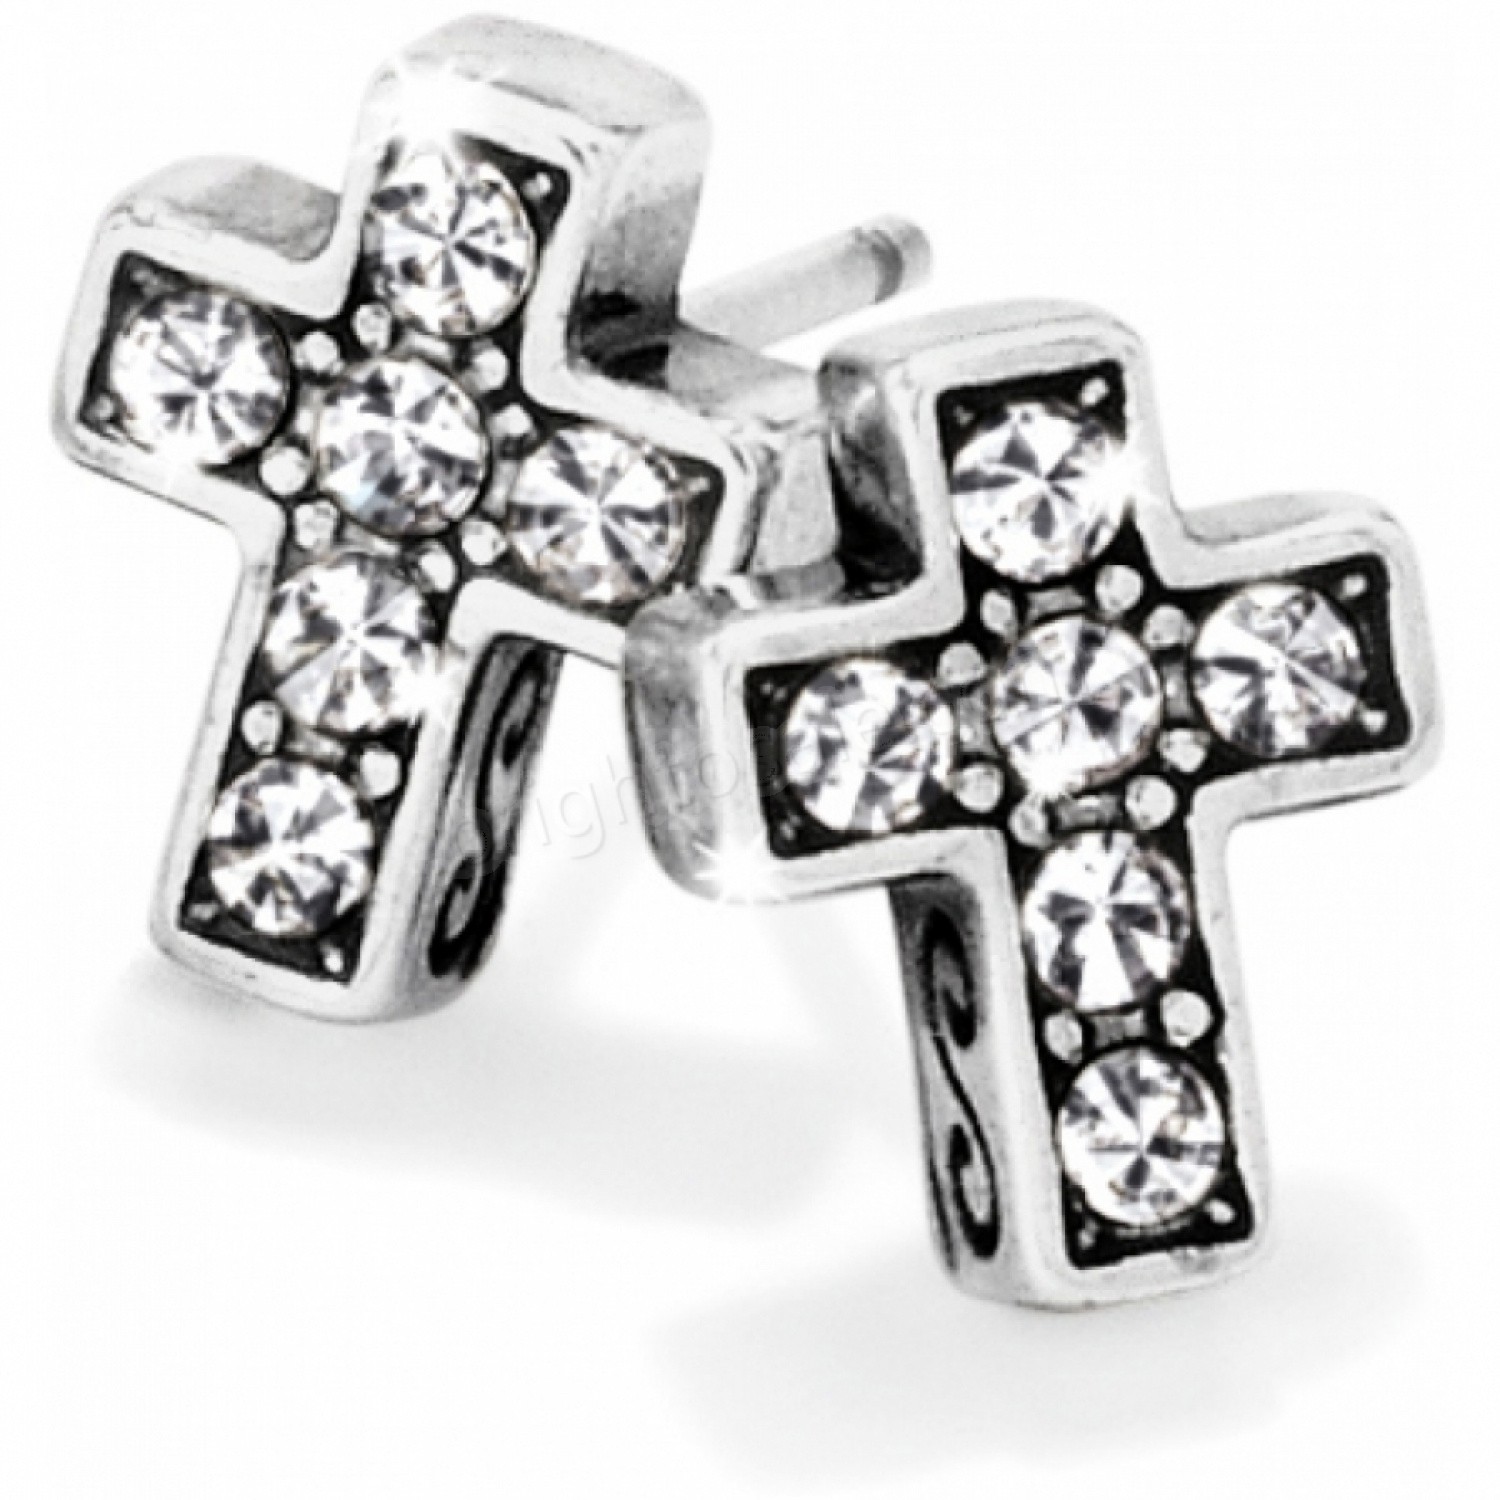 Brighton Collectibles & Online Discount Starry Night Cross Mini Post Earrings - Brighton Collectibles & Online Discount Starry Night Cross Mini Post Earrings